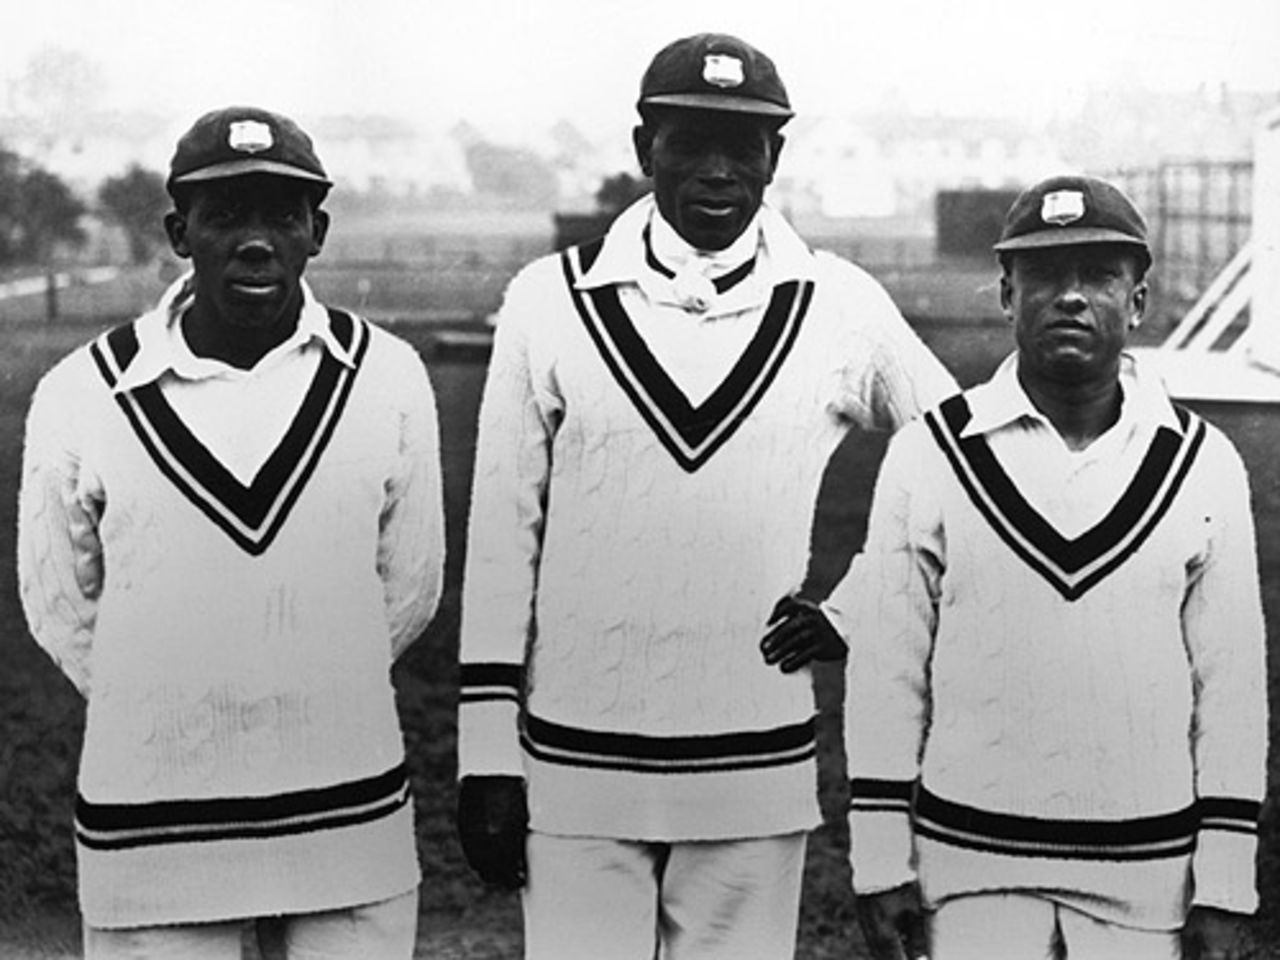 Learie Constantine, Joe Small and Barto Bartlett at Burbage Road, Dulwich v West Indians, Dulwich, May 1, 1928